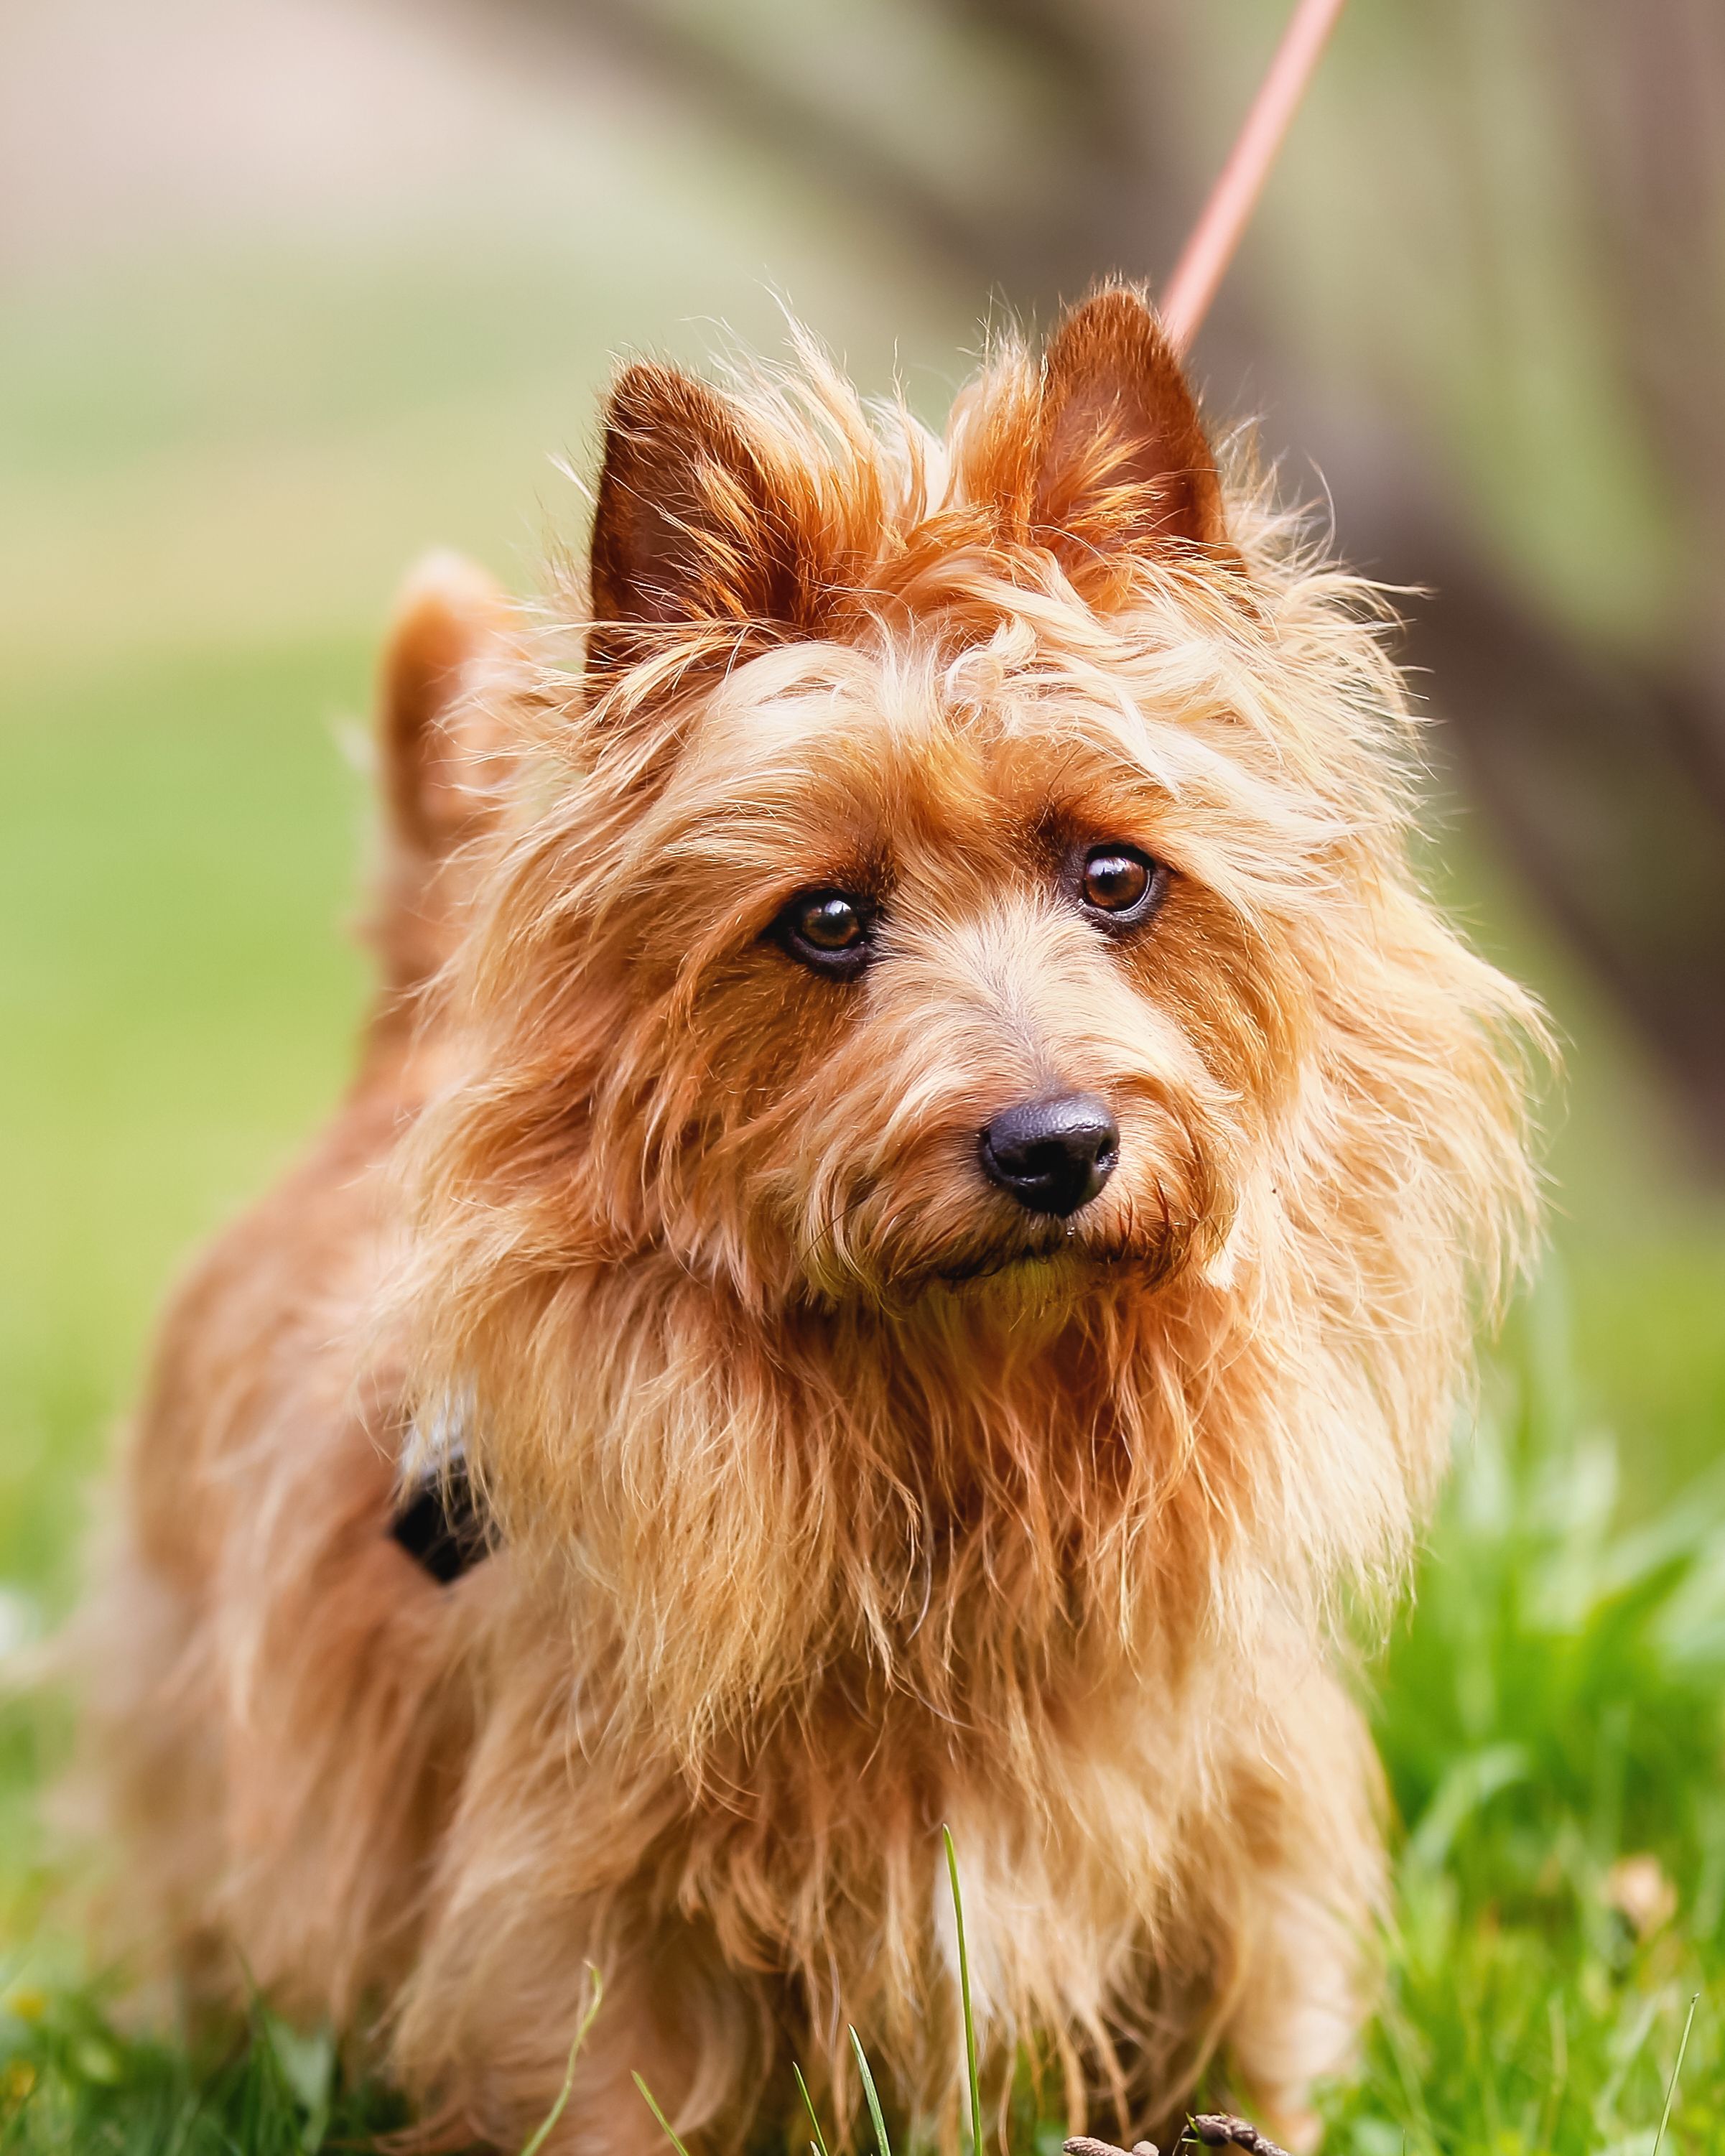 terrier dog breed chart